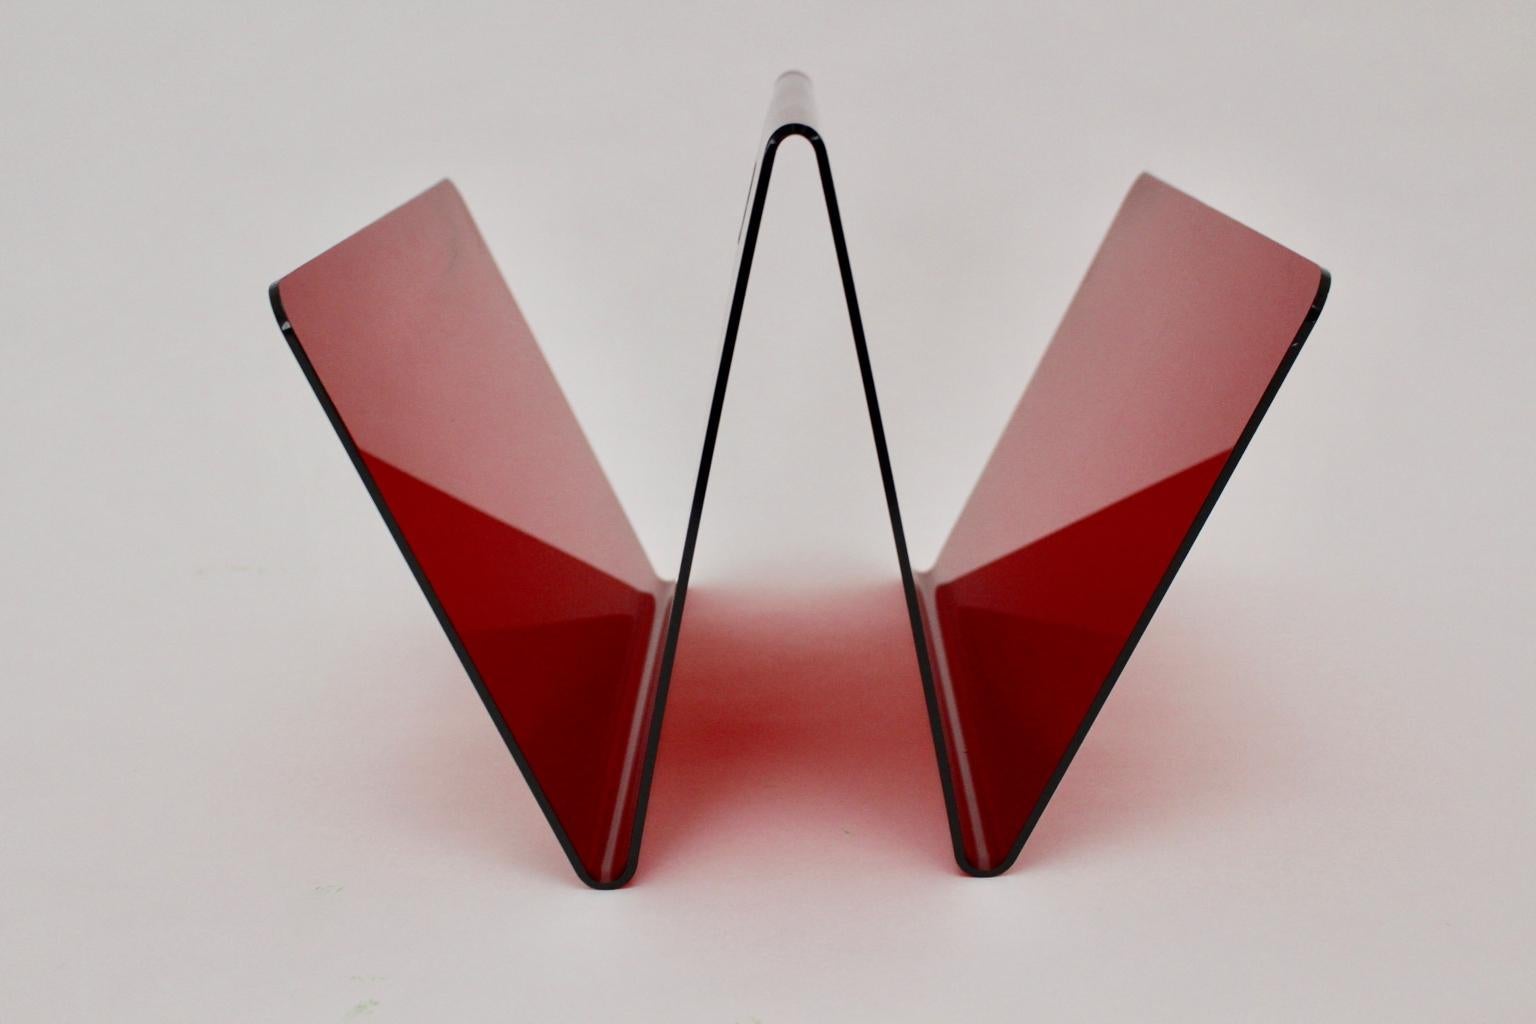 Space Age red vintage magazine rack from plastic designed and made circa 1970. The magazine rack features two compartments for the newspapers. Also it shows a handle for an easy handling.
The vintage condition is very good with minor signs of age